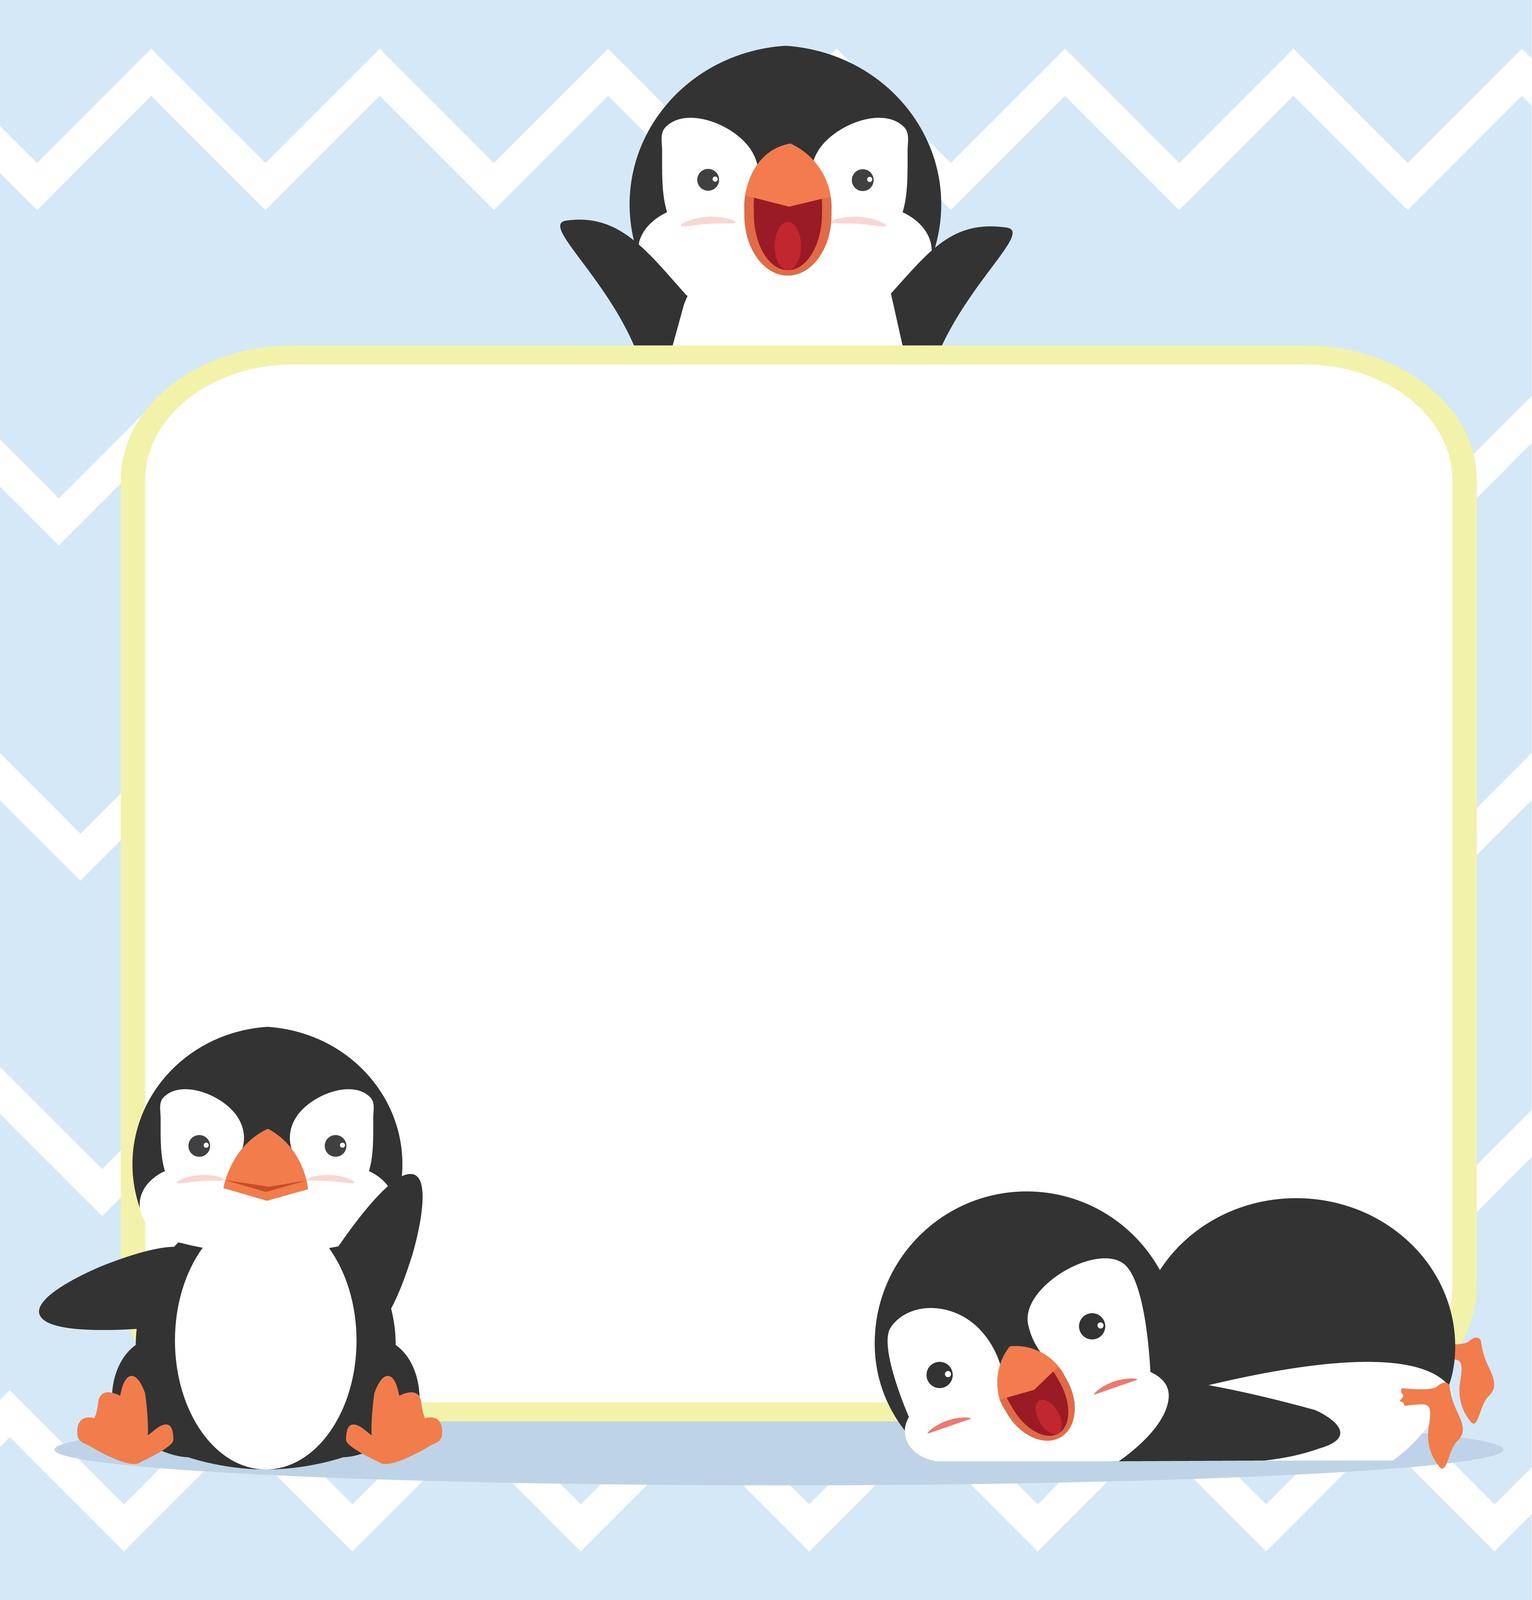 Cute Frame Border with Adorable Penguin background